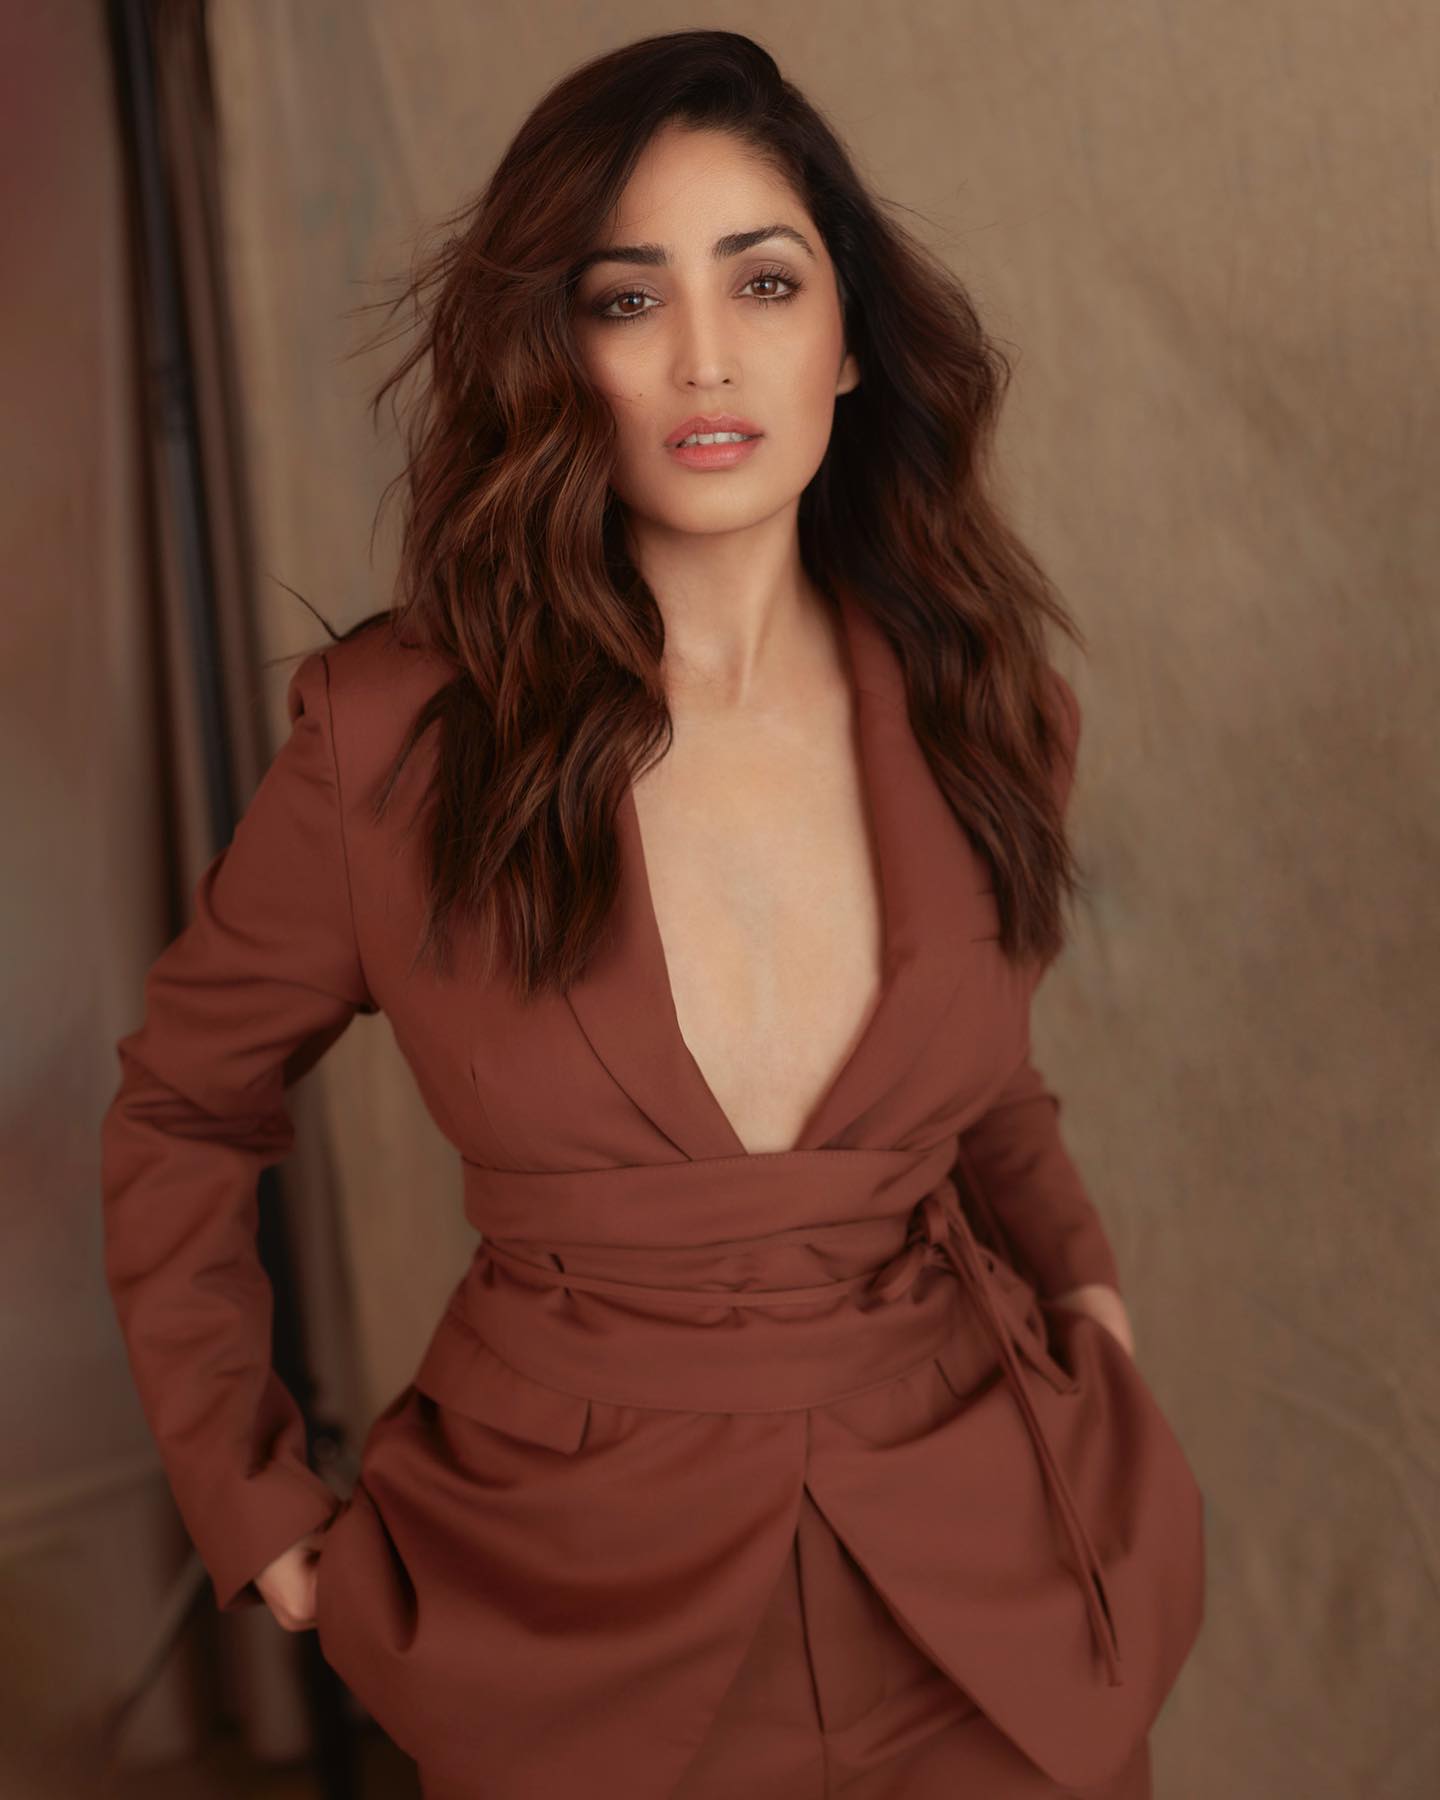 Exclusive! ‘My Venture In Television Was Short-Lived And Really Unsuccessful,’ – Yami Gautam Dhar